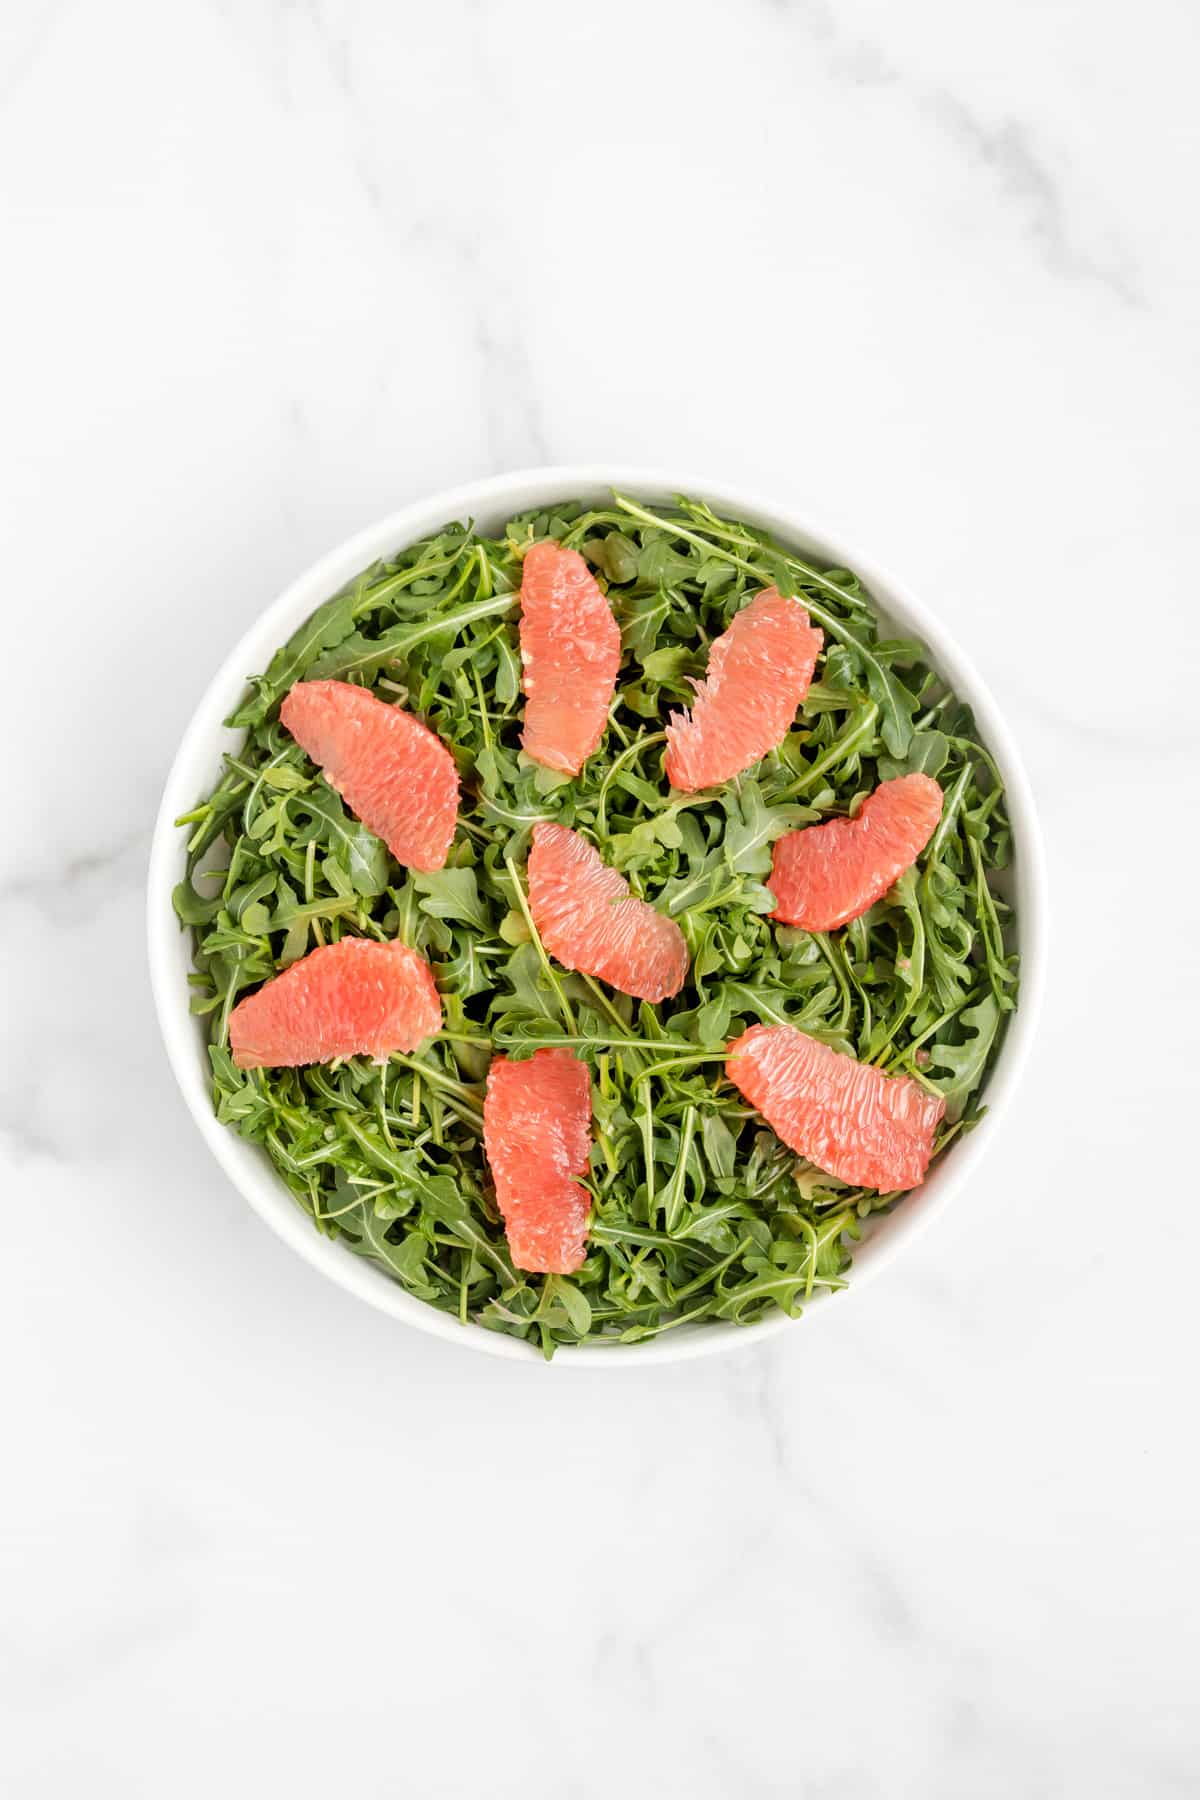 A bed of arugula in a bowl topped with grapefruit segments.